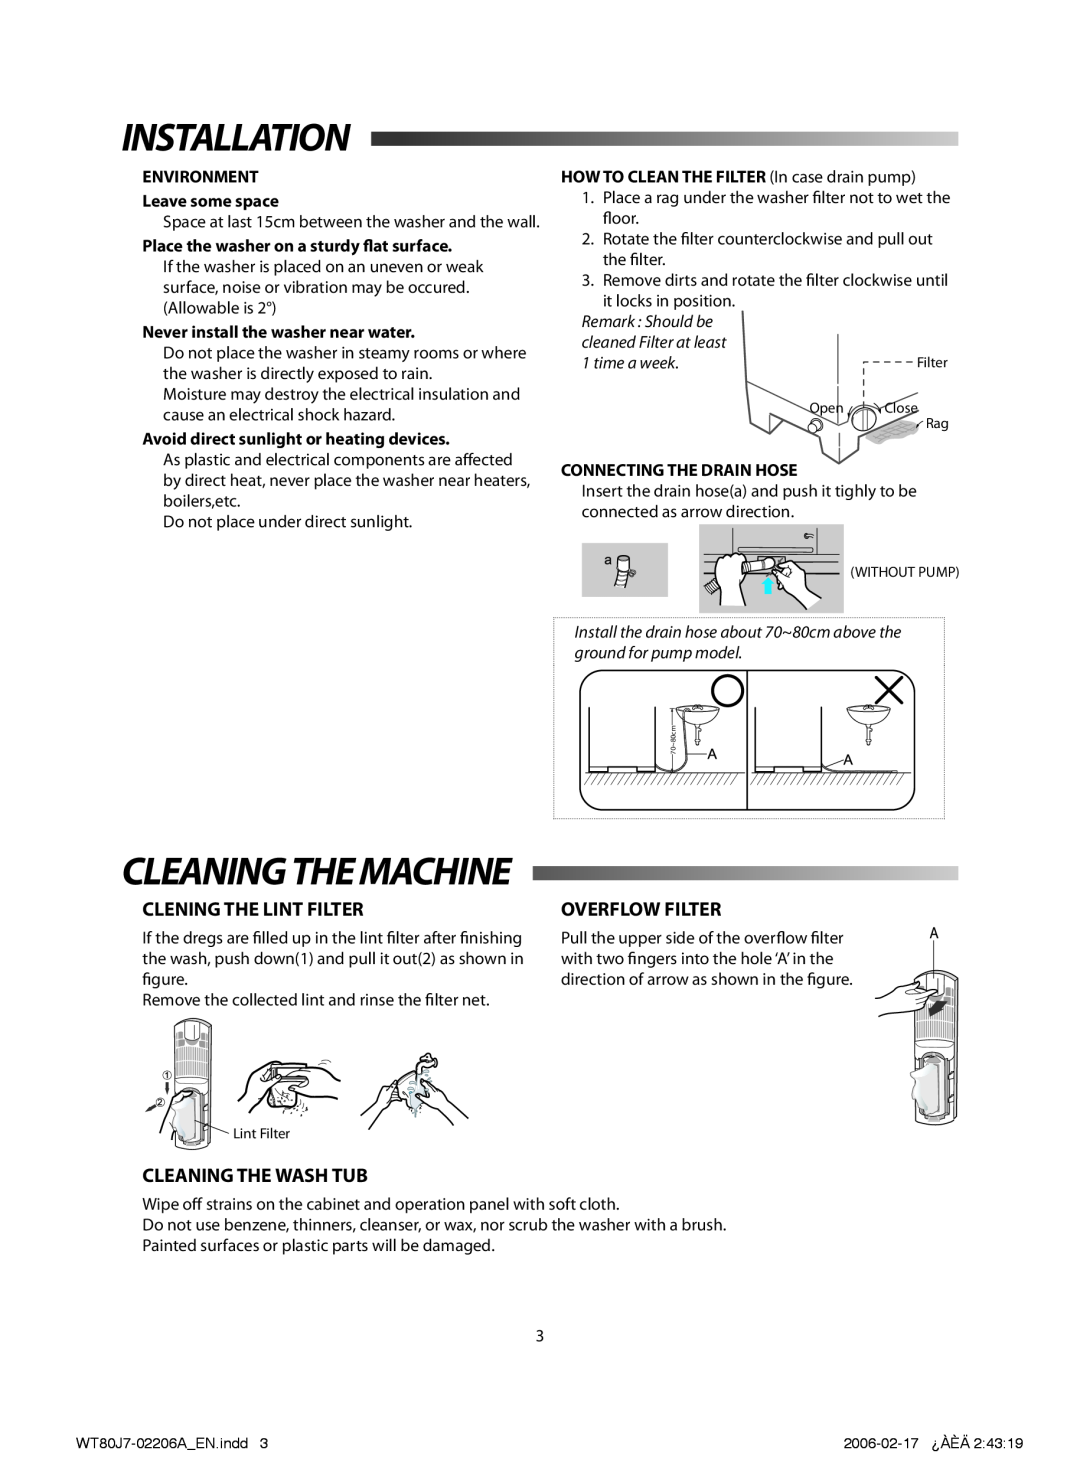 Samsung WT89J7PEW/HAC Installation, Clening The Lint Filter, Overflow Filter, Cleaning The Wash Tub, Cleaningthemachine 